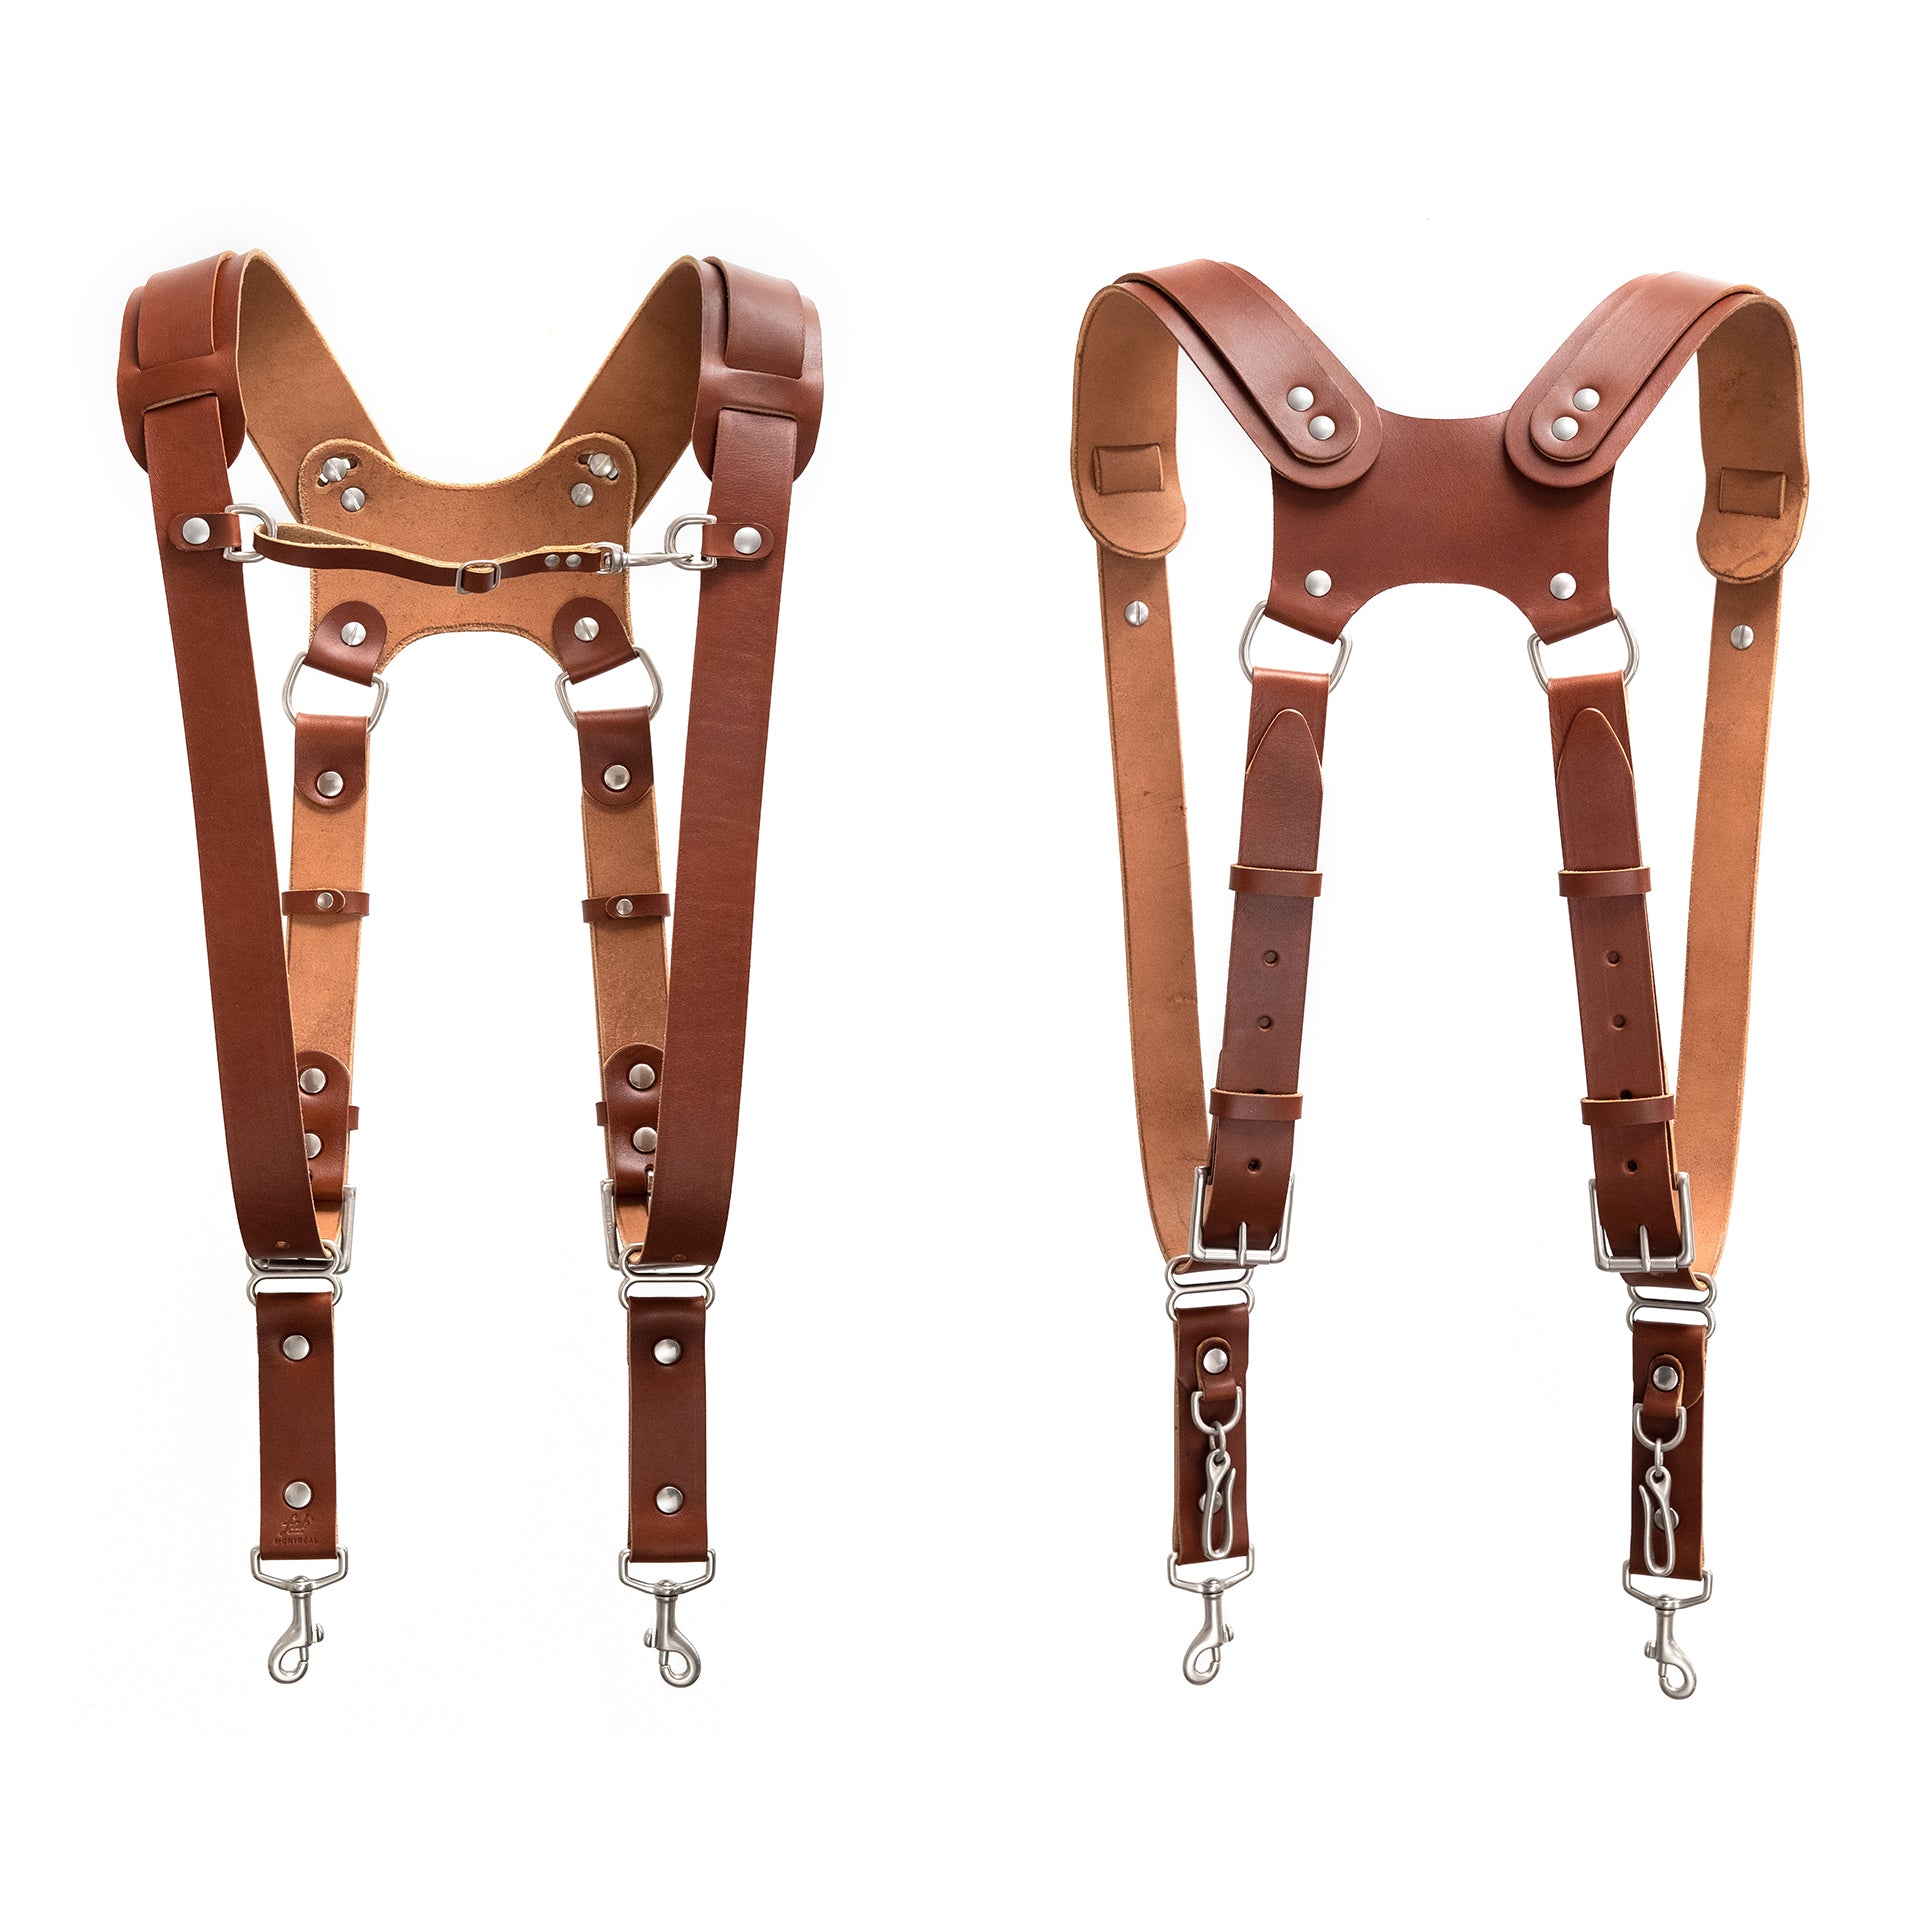 Fab 'F22 Harness - Cuir marron - Taille XS